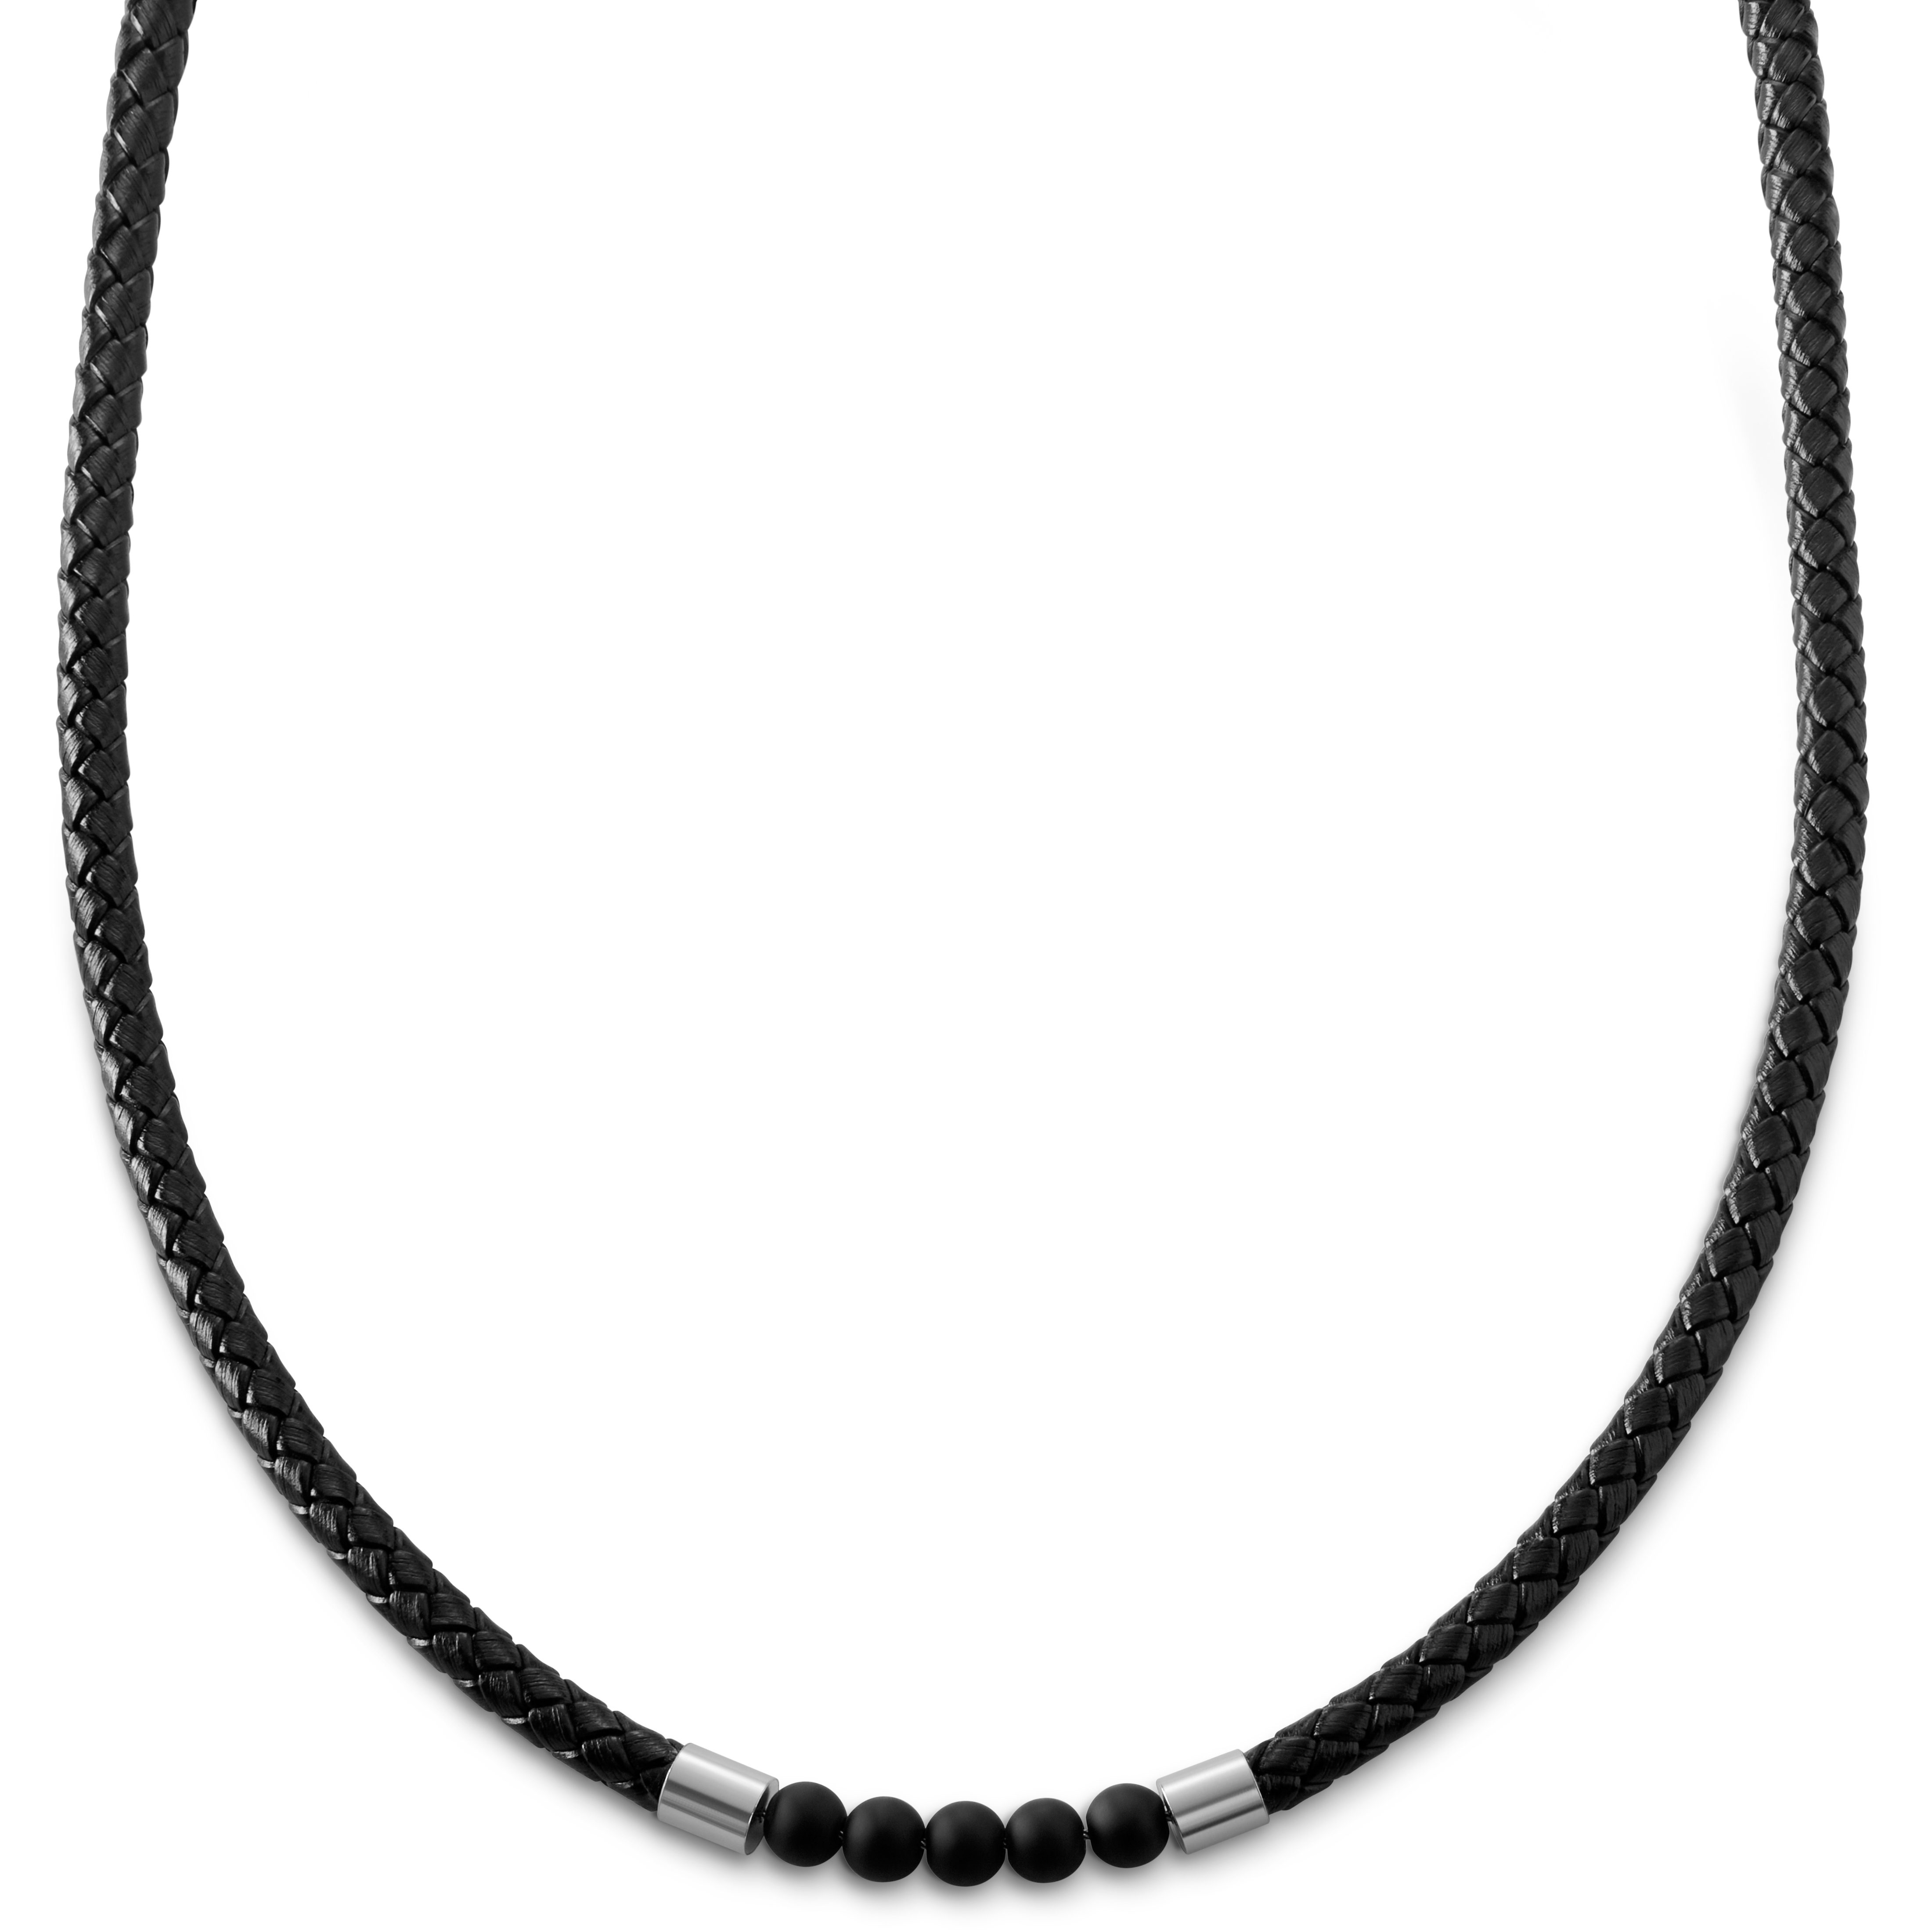 Black Stainless Steel Rope Chain Necklace Chn9704 | Wholesale Jewelry  Website